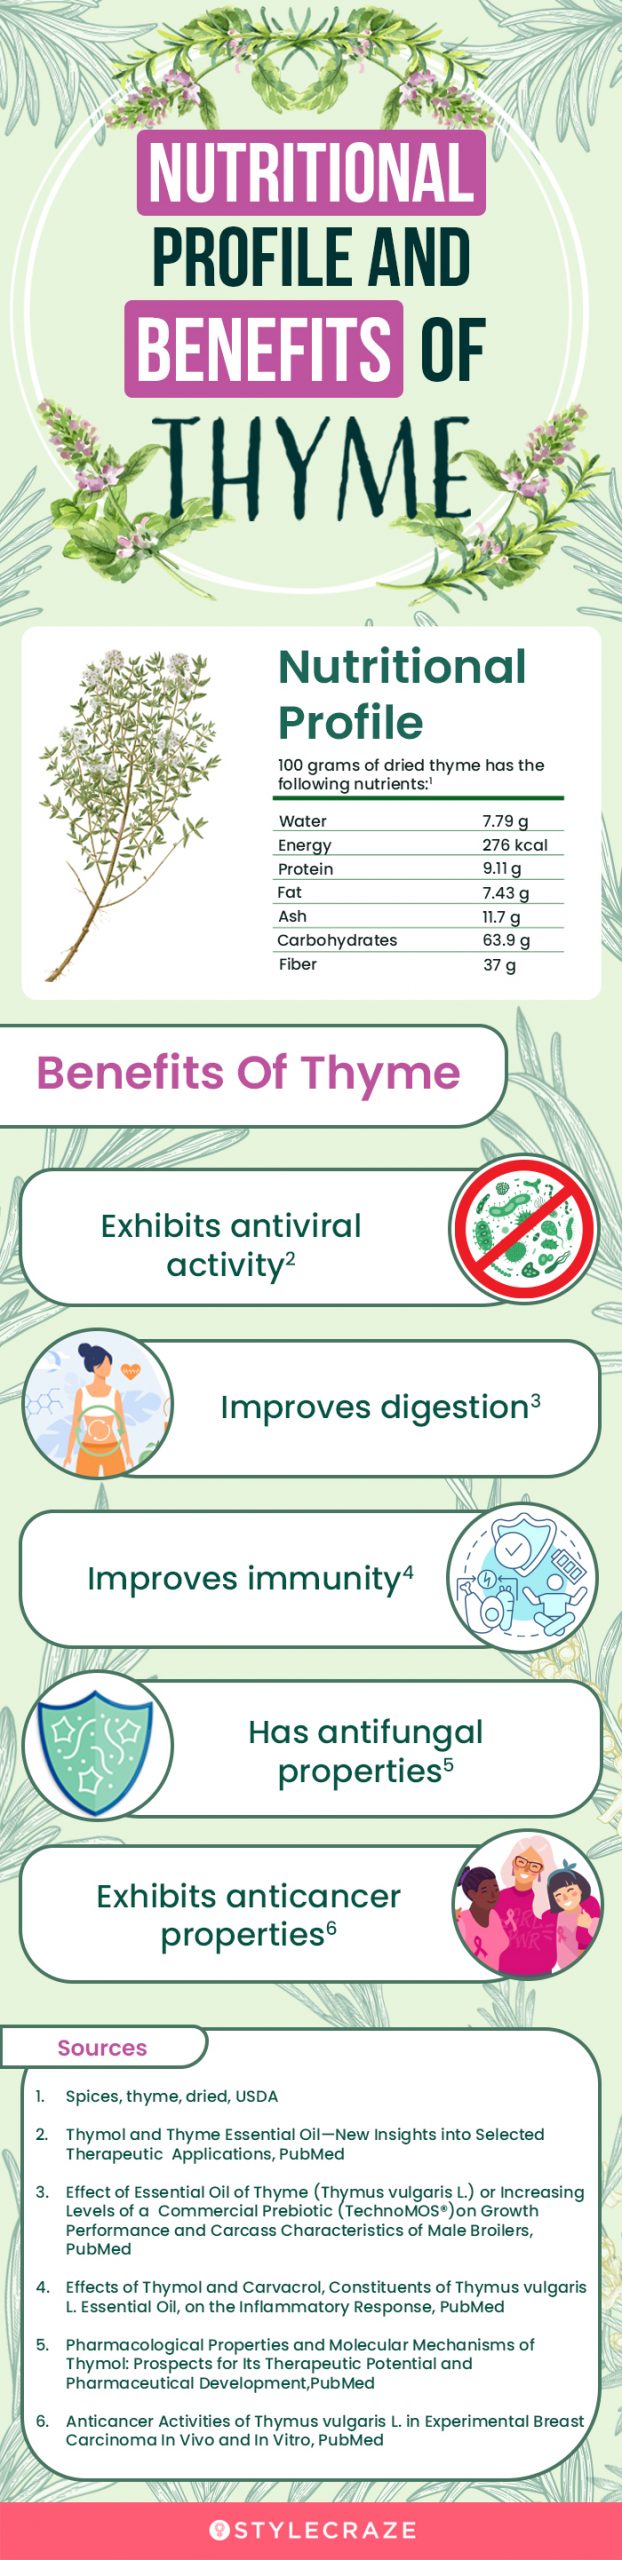 nutritional profile and benefits of thyme (infographic)